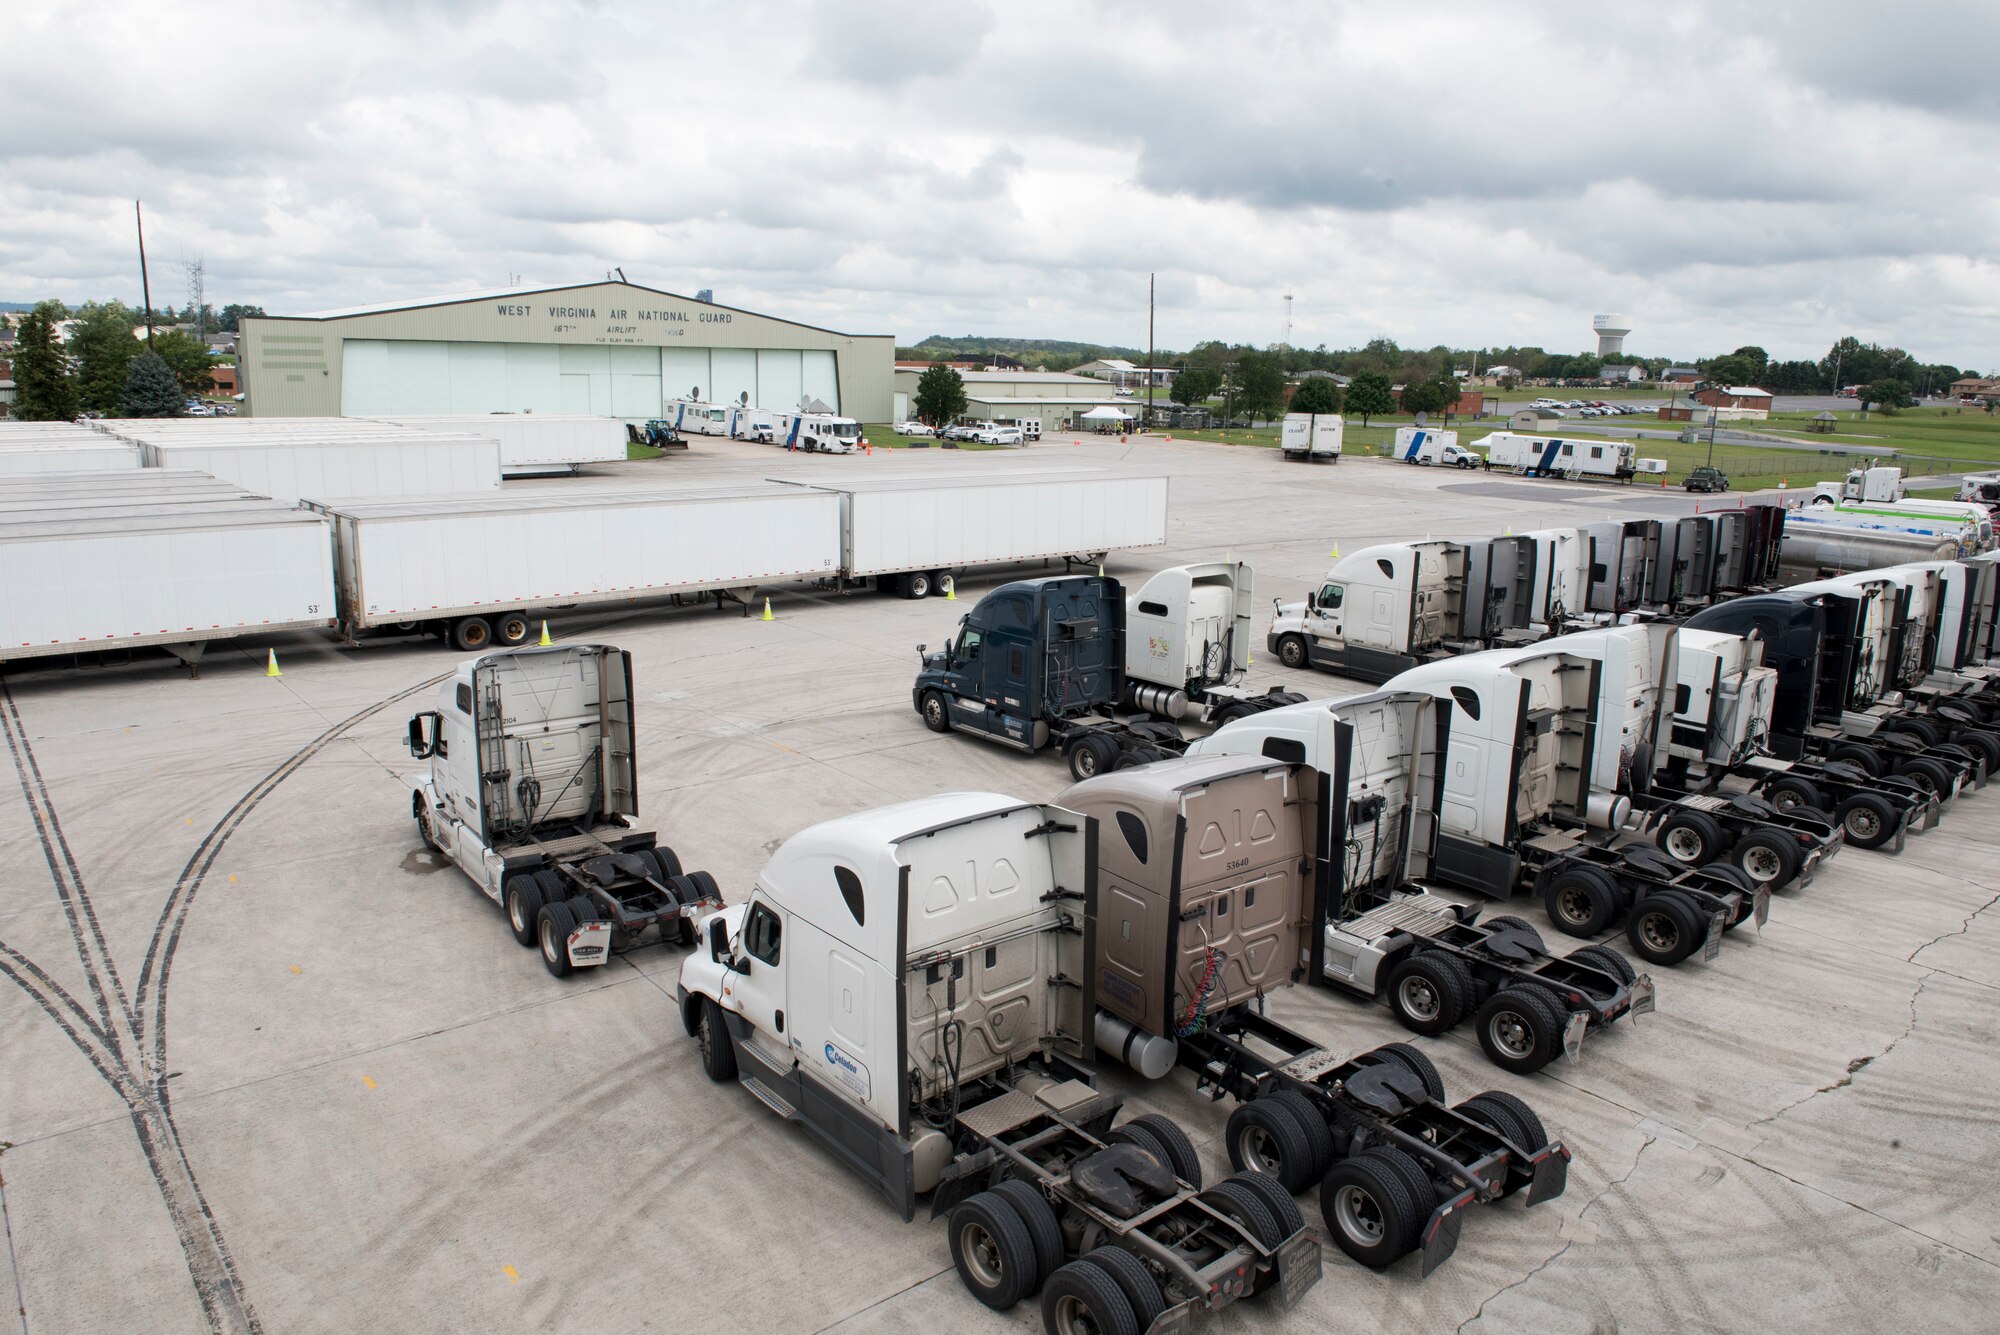 Tractors and trailers full of emergency relief supplies set on stand-by on the transient ramp at the 167th AIrlift Wing, Sept. 13. The Federal Emergency Management Agency staged water, food, cots, blankets, tents and fuel at the wing in preparation for Hurricane Florence. (U.S. Air National Guard photo by Senior Master Sgt. Emily Beightol-Deyerle)